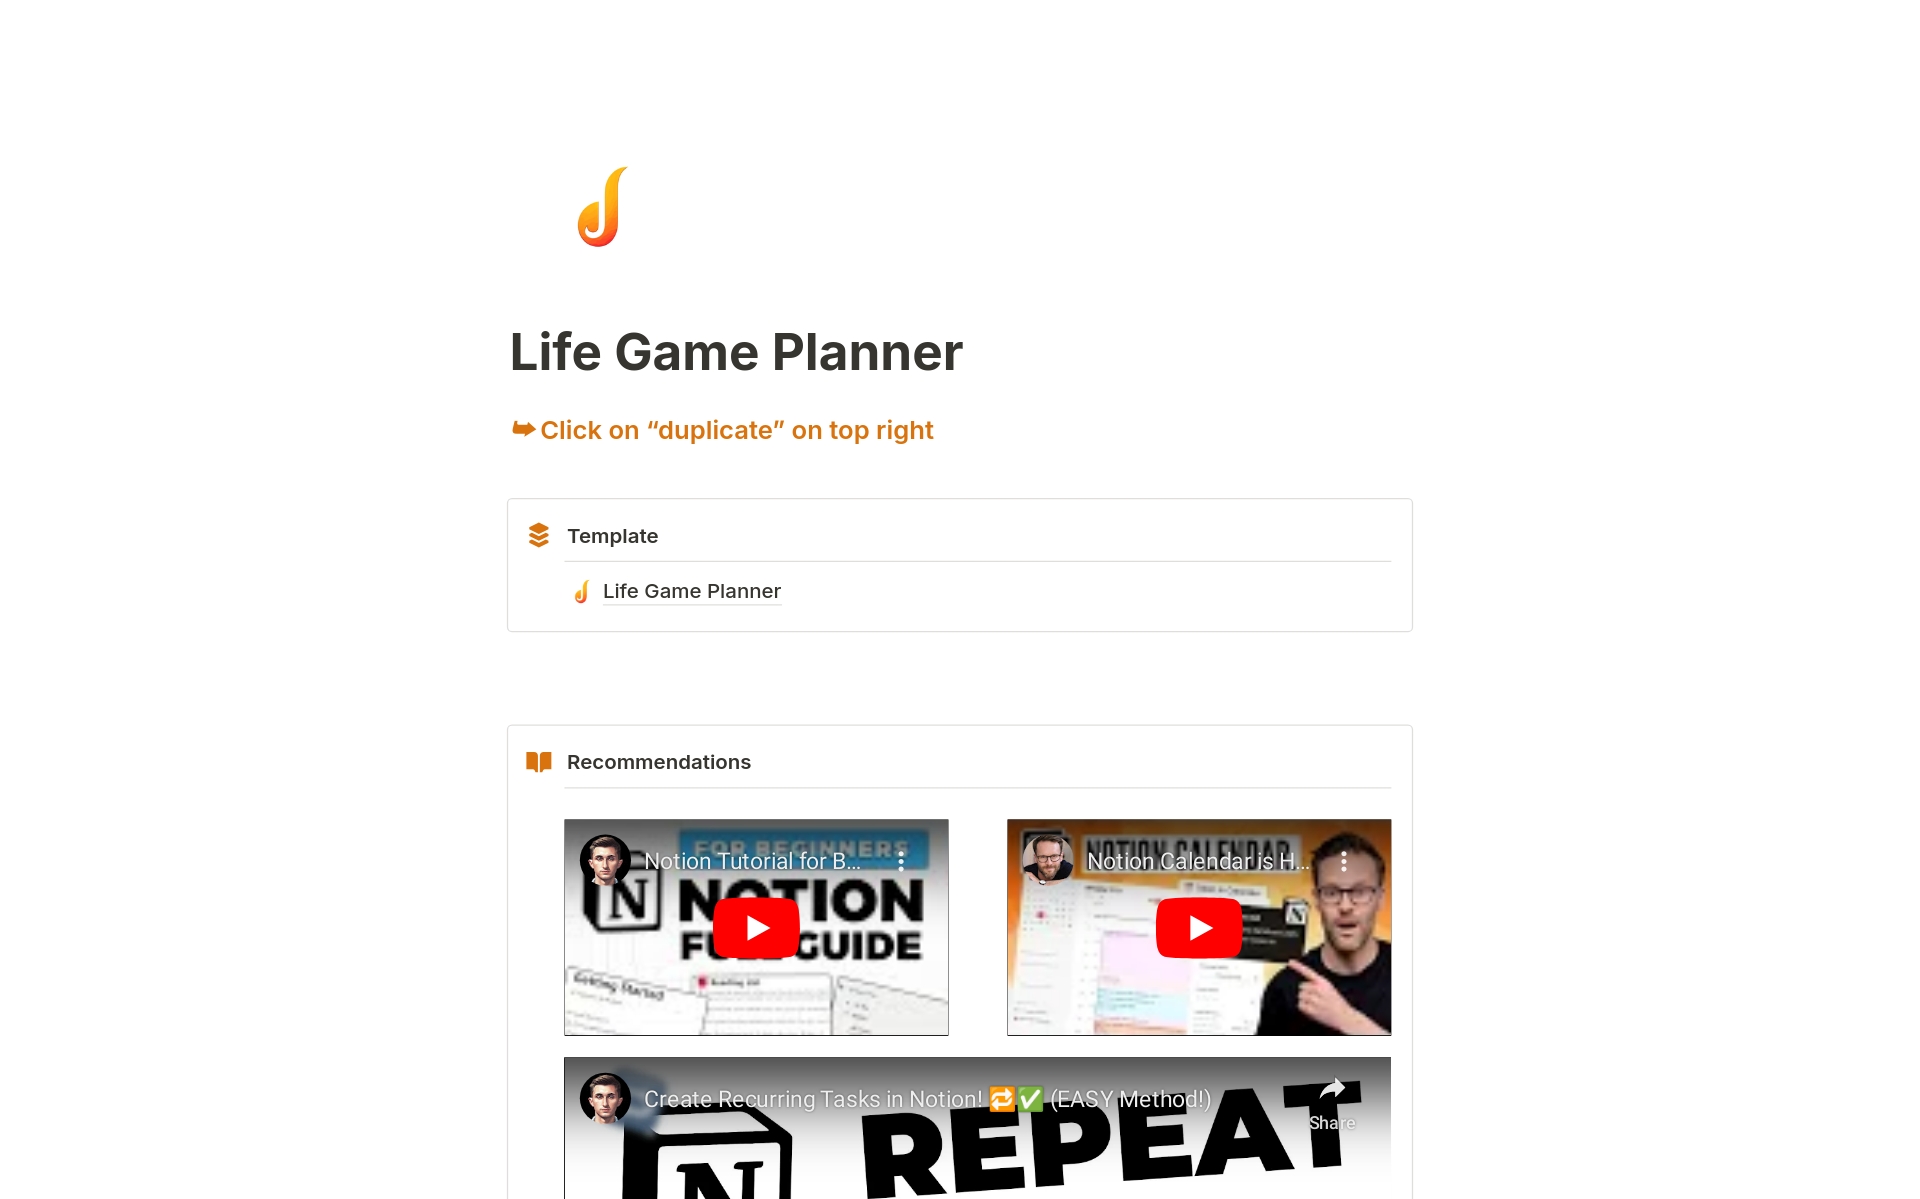 Master Work-Life Balance with Life Game Planner! This Notion template empowers professionals to manage stress, maximize productivity, and harmonize life's facets. Featuring task management, emotional well-being tools, and holistic life integration based on 5 human needs.